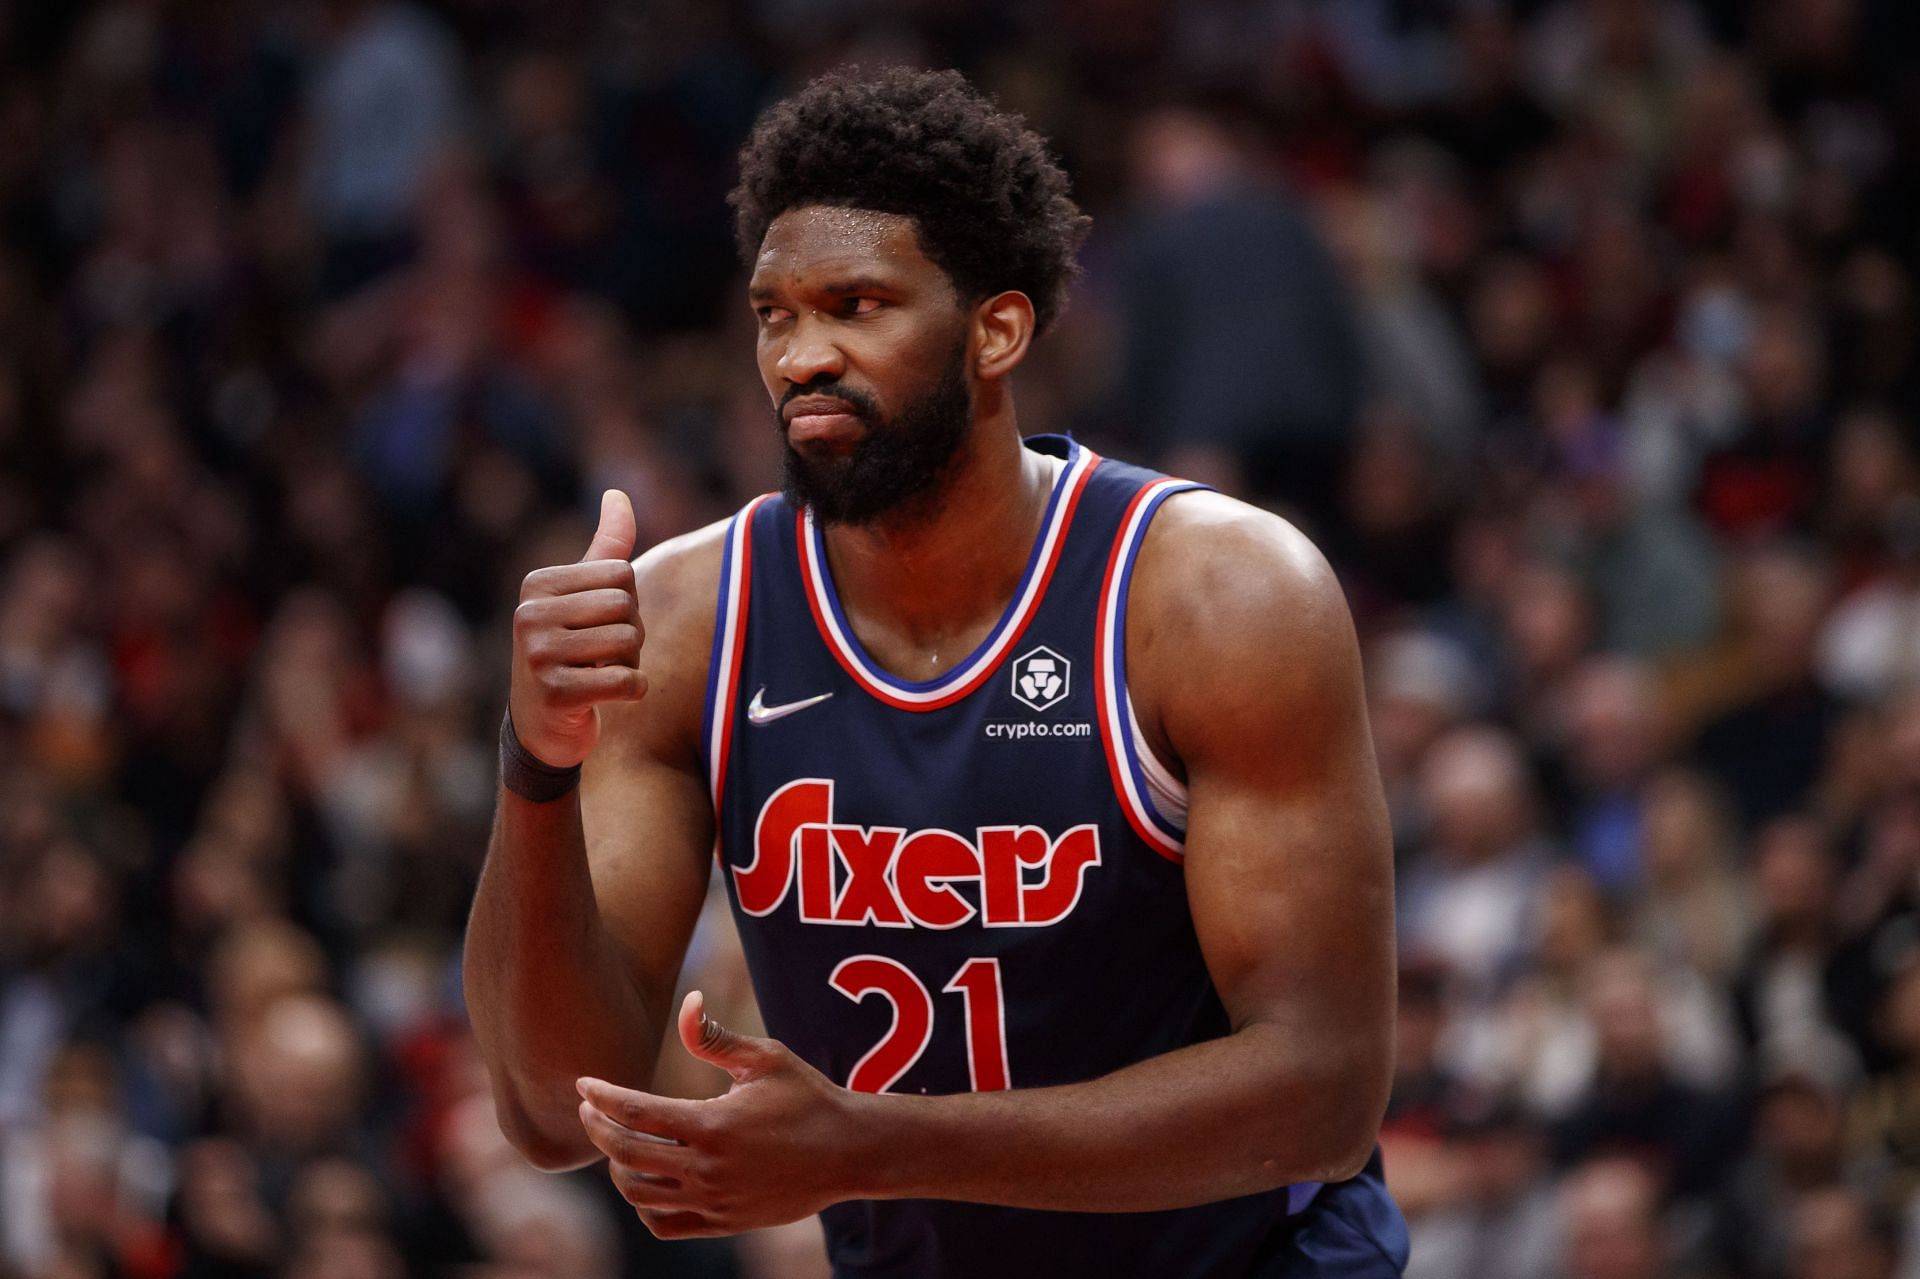 Joel Embiid of the Philadelphia 76ers against the Toronto Raptors during the 2022 NBA playoffs